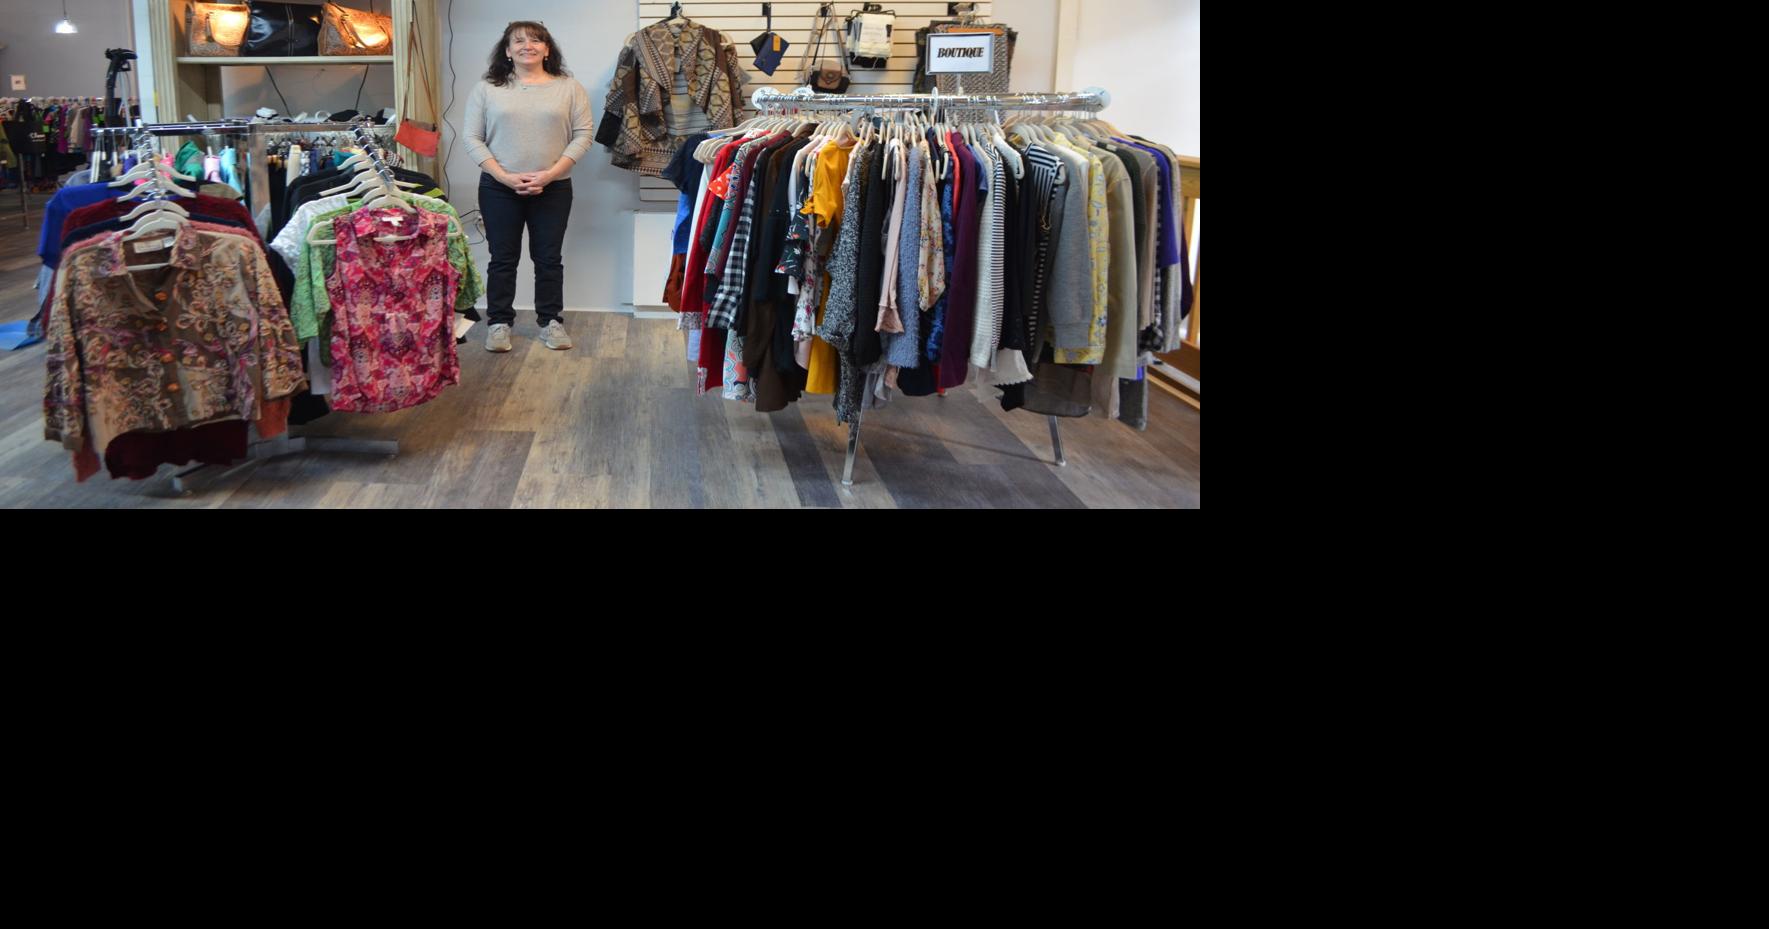 Sunrise Boutique embraces community and style - Morinville News